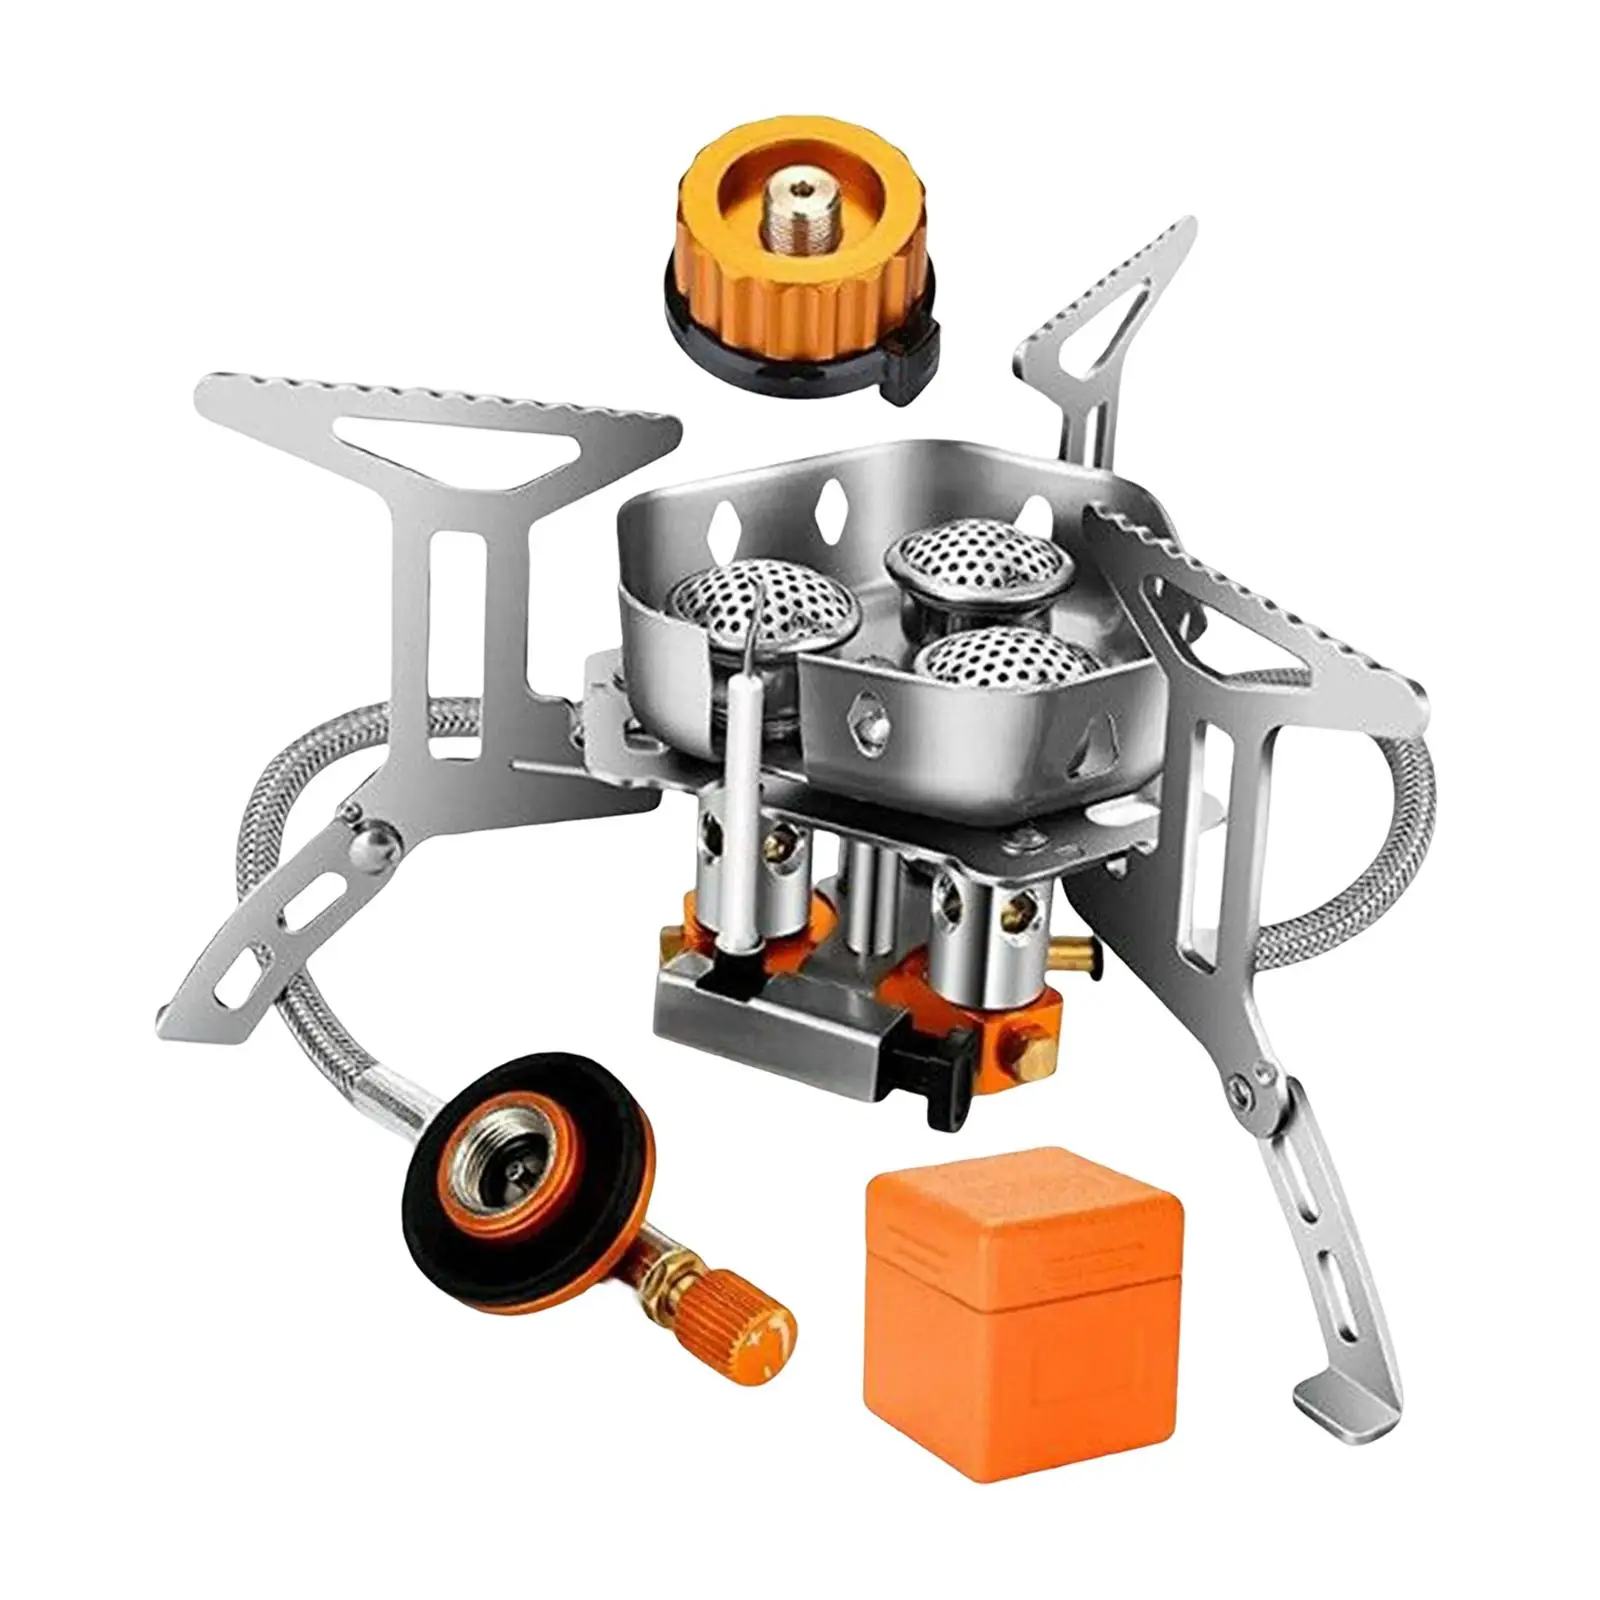 Portable Camping Gas Stove Split Burner Adjustable Windproof Camp Stove for Backpacking Hiking Butane Mountaineering Propane